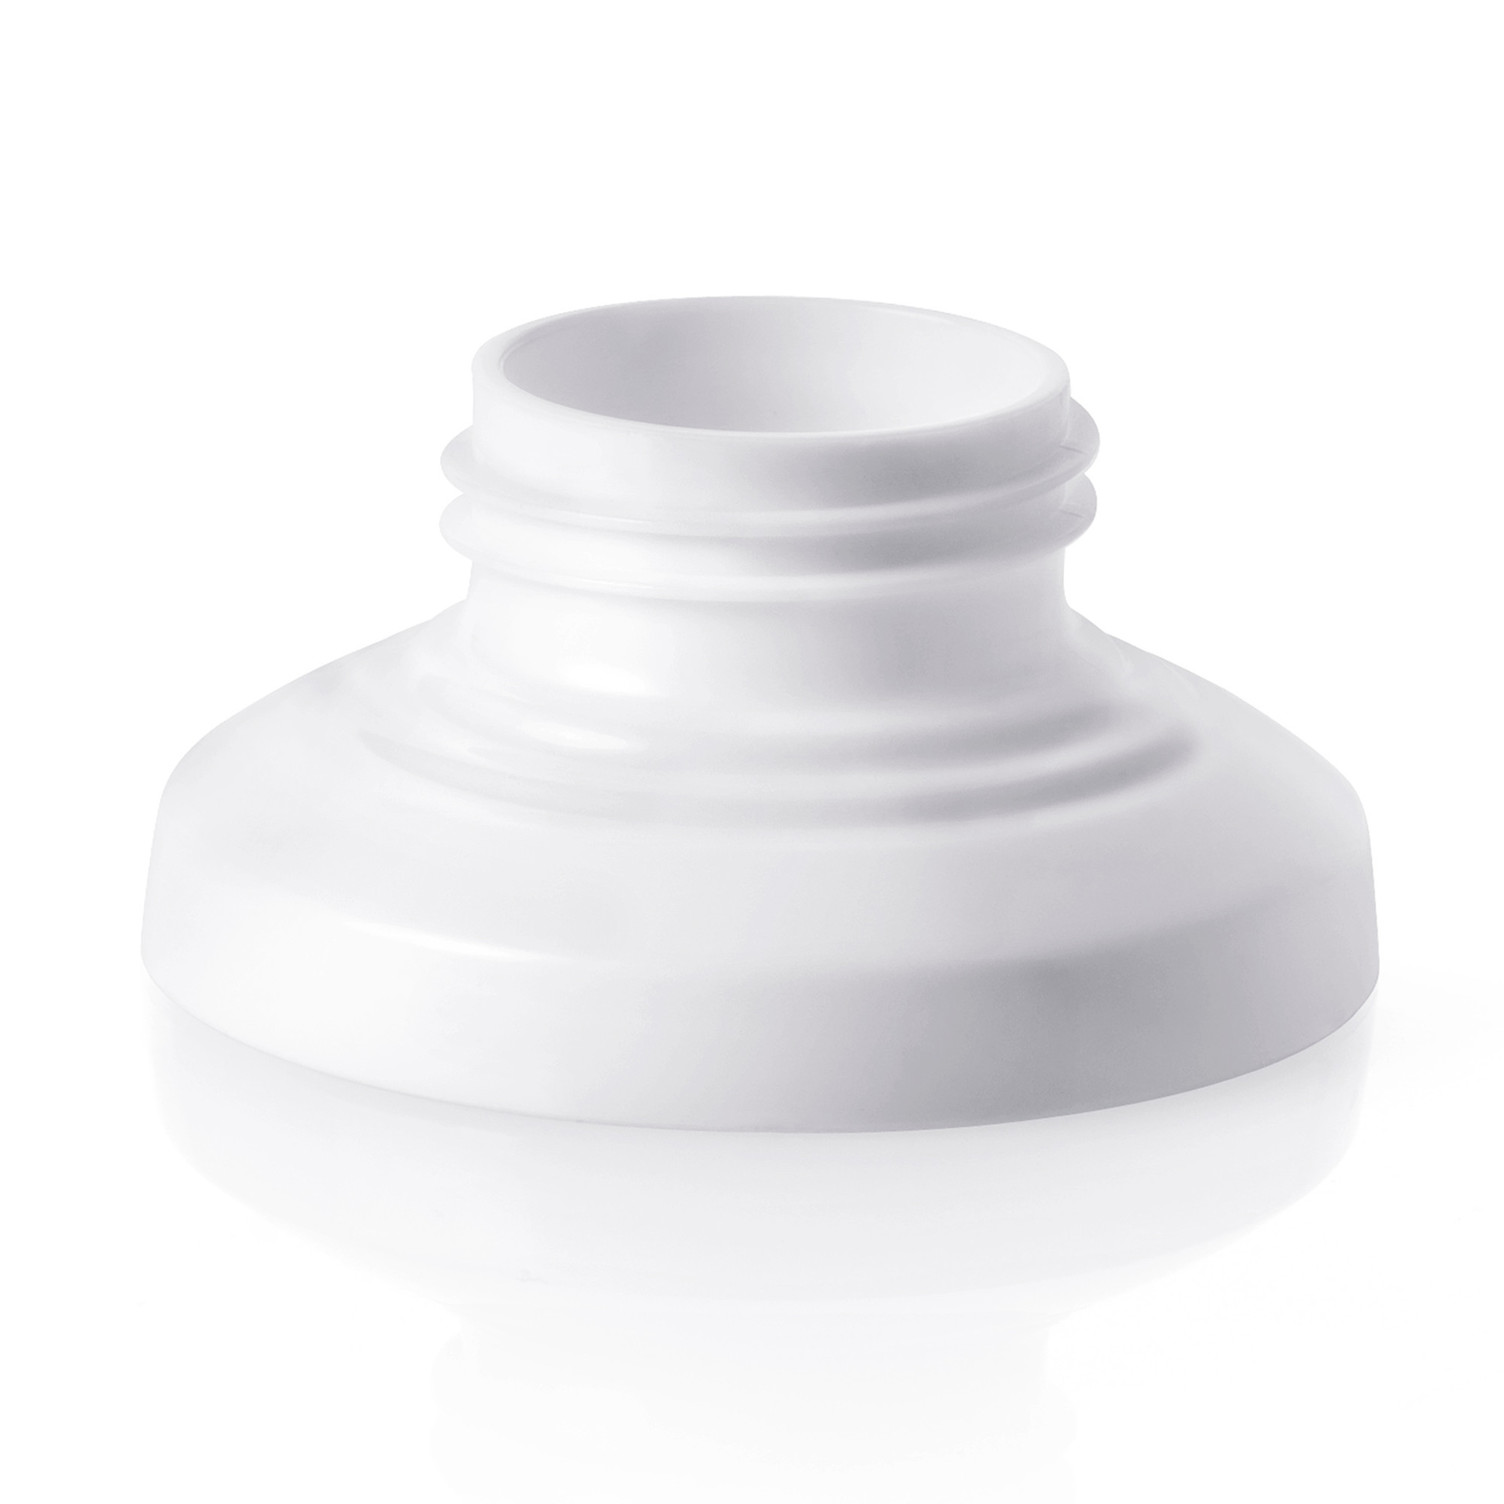 Tommee Tippee Closer to Nature Breast Pump and Bottle Adaptor - image 1 of 5